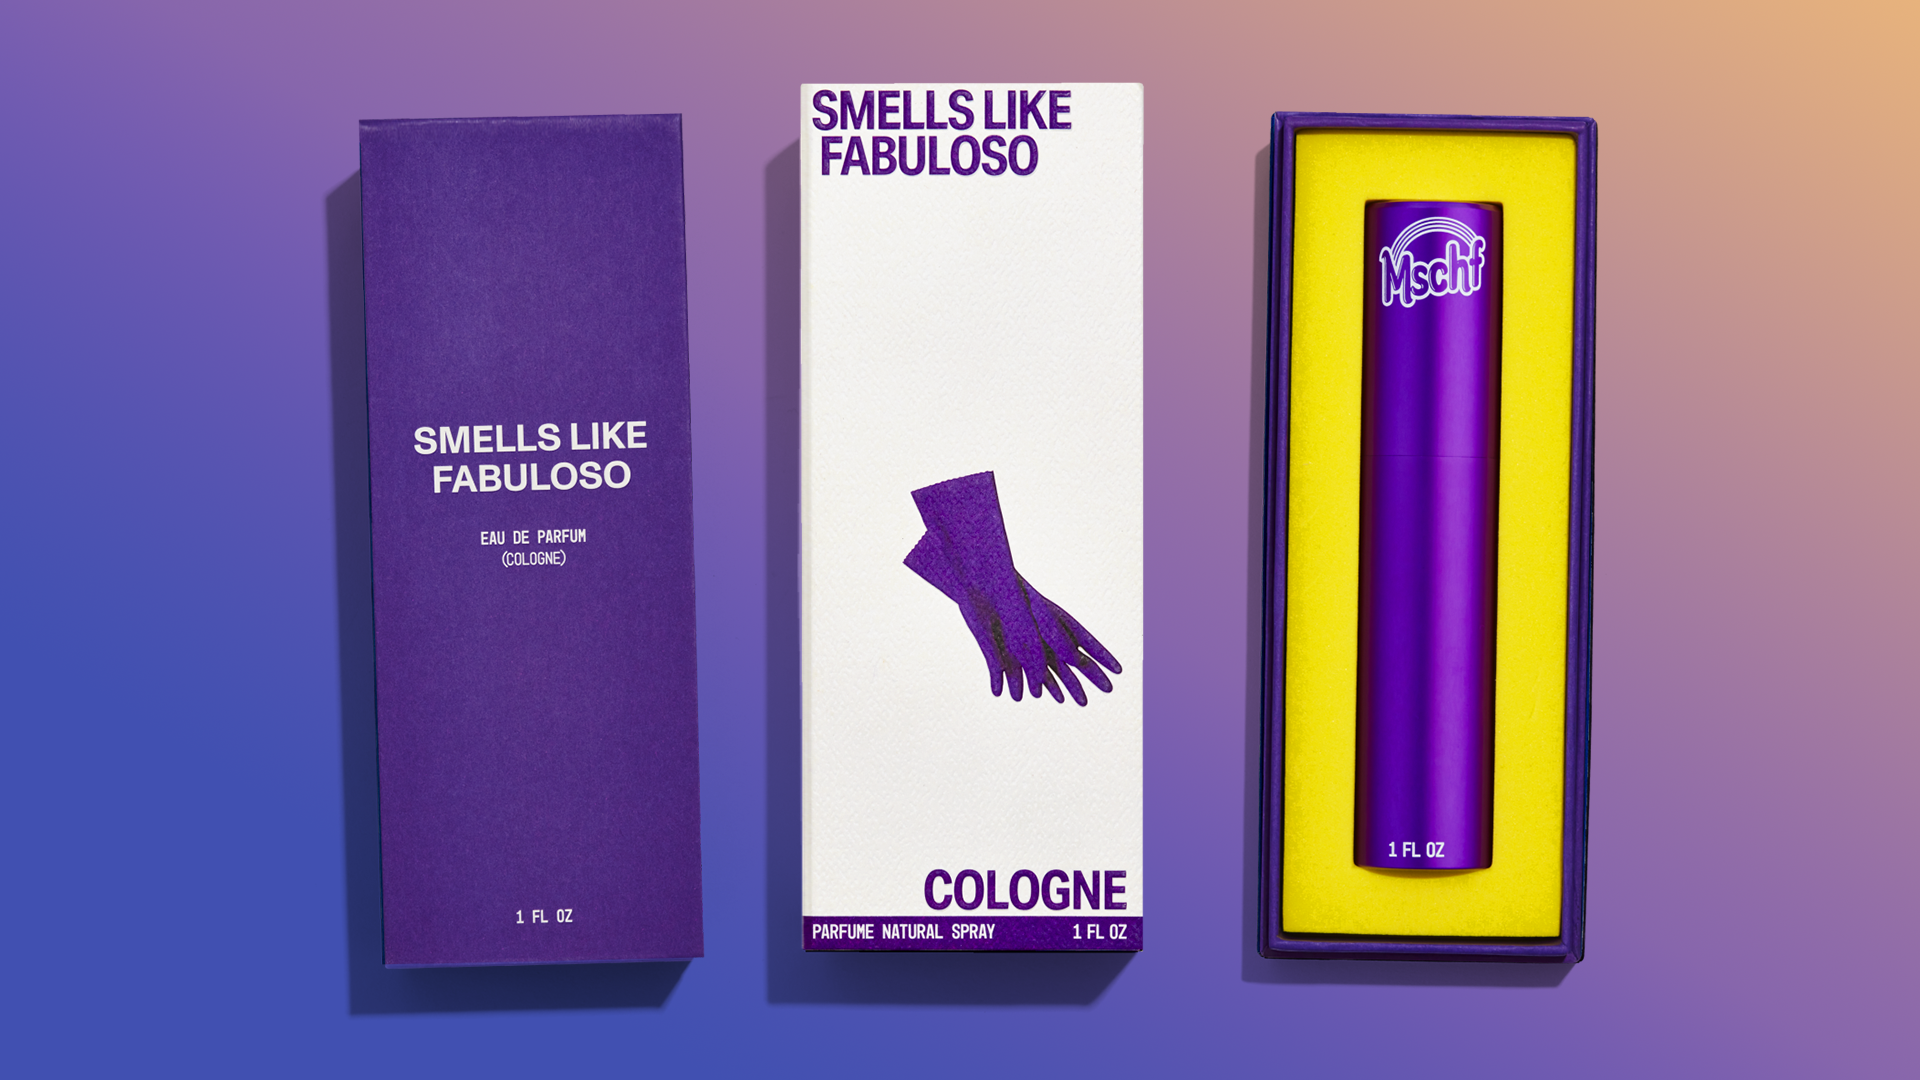 MSCHF Releases Fabuloso Perfume, a Love-Letter to the Beloved All-Purpose Cleaner